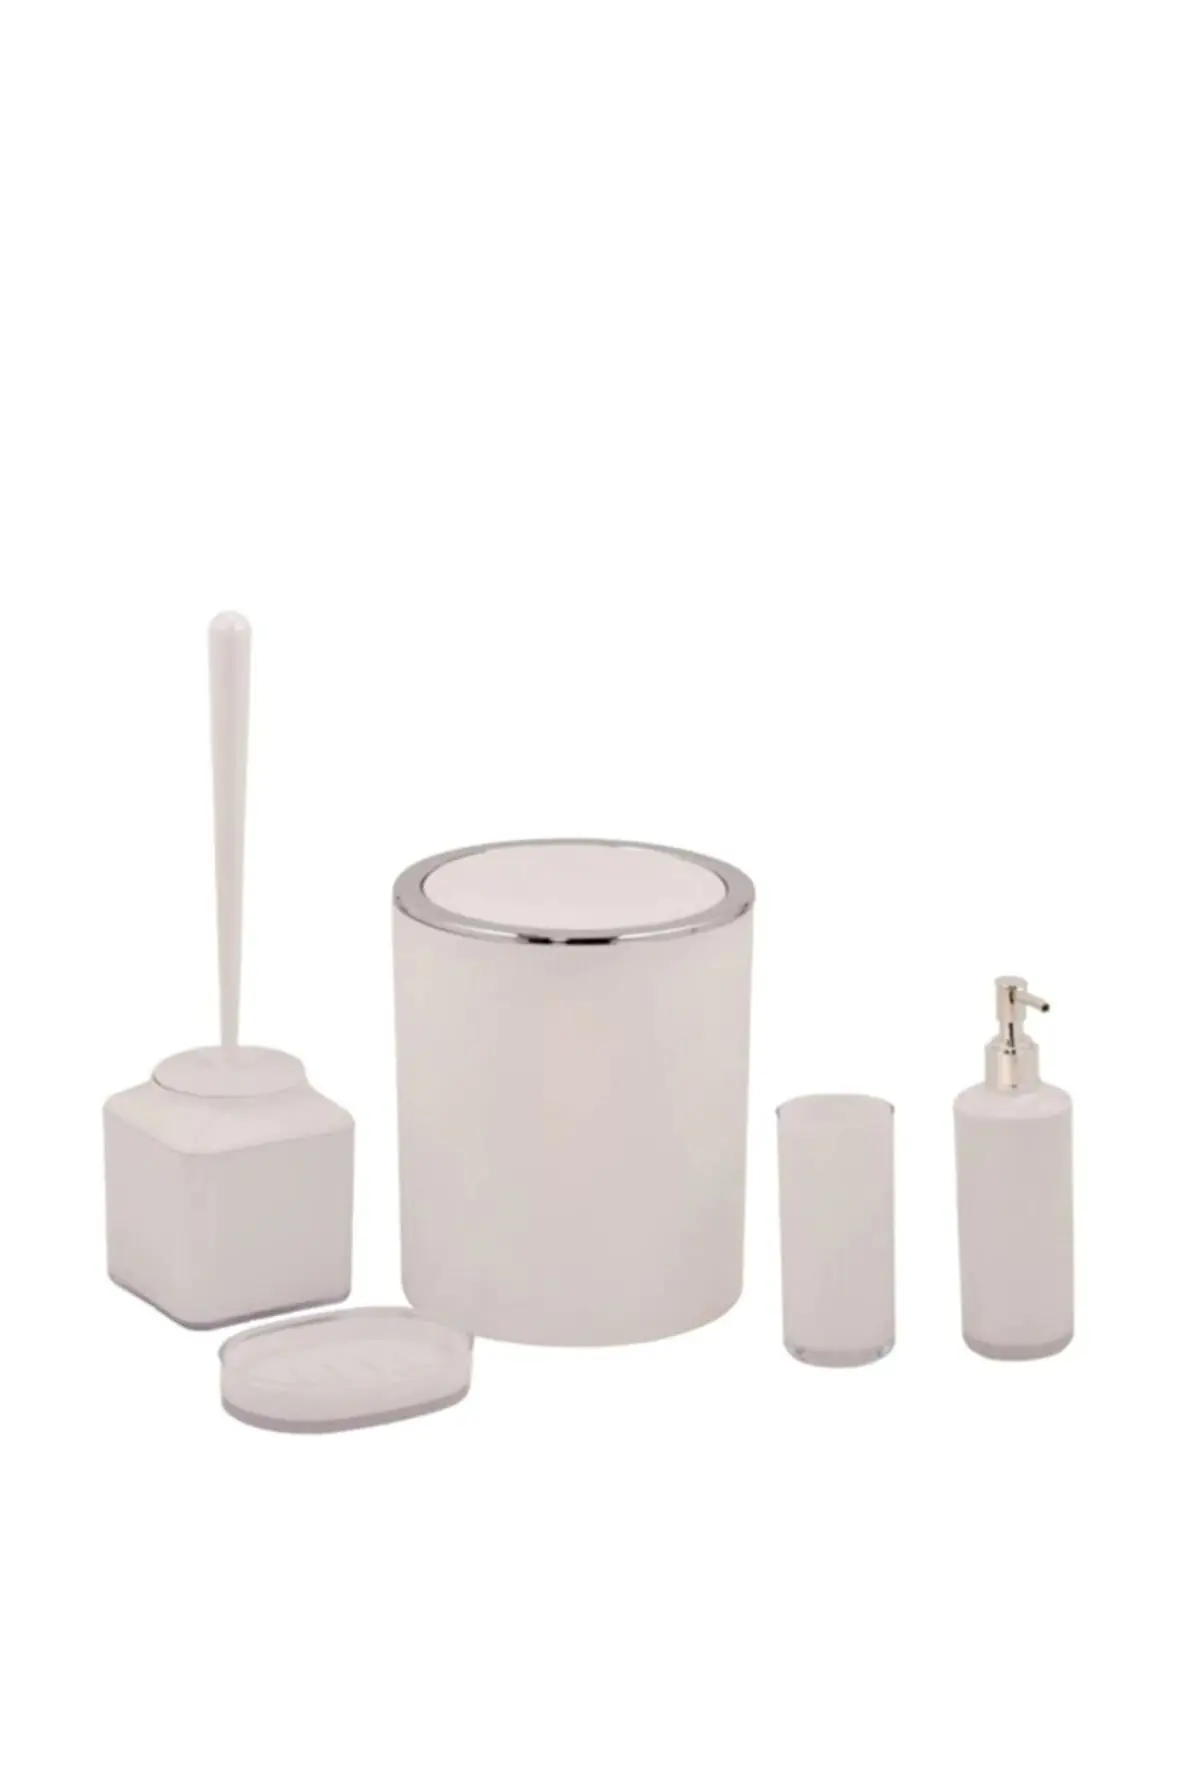 Bathroom Accessory Set White Silver 5 Pcs Acrylic Lux Toothbrush Holder Liquid And Solid Soap Dispenser Toilet Brush Trash Can